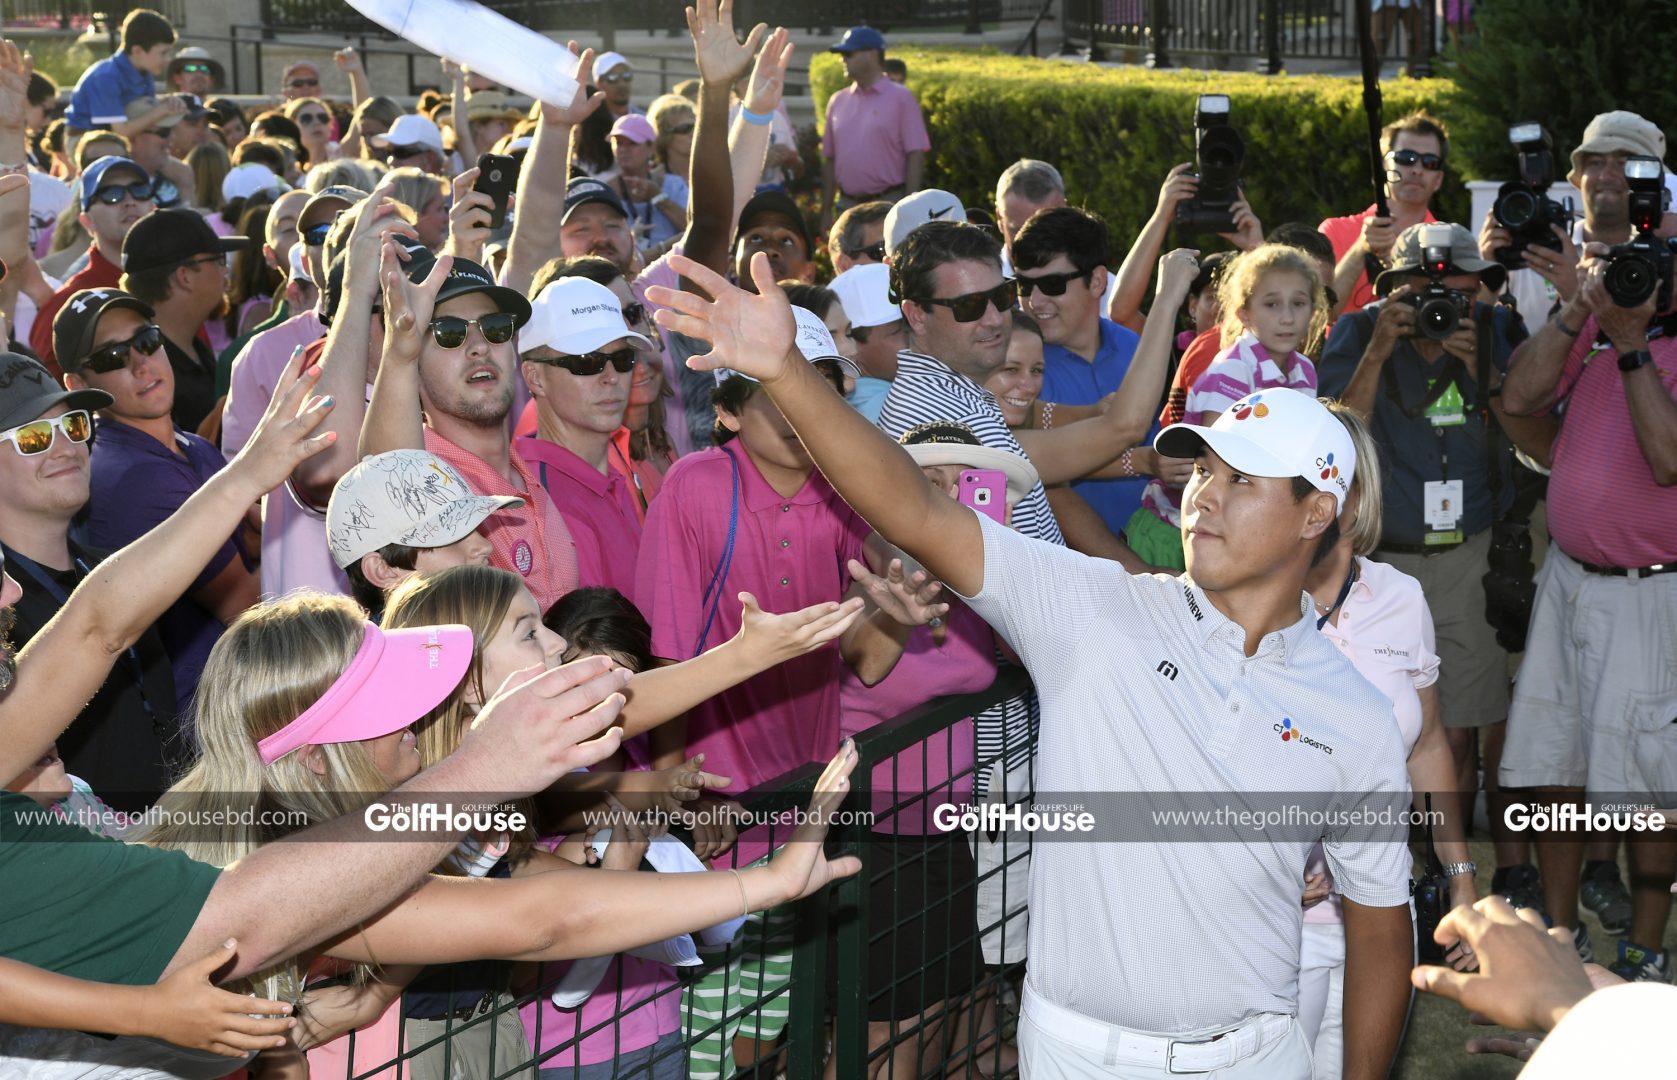 PONTE_VEDRA_BEACH_FL _MAY_14_Si_Woo_Kim_throws_pin_flags_to_fans_during_the_final_round_of_THE_PLAYERS_Championship_on_THE_PLAYERS_Stadium_Course_at_TPC_Sawgrass_on_May_14_2017_in_Ponte_Vedra_Beach _(Photo_by_Ryan_Young/PGA_TOUR)